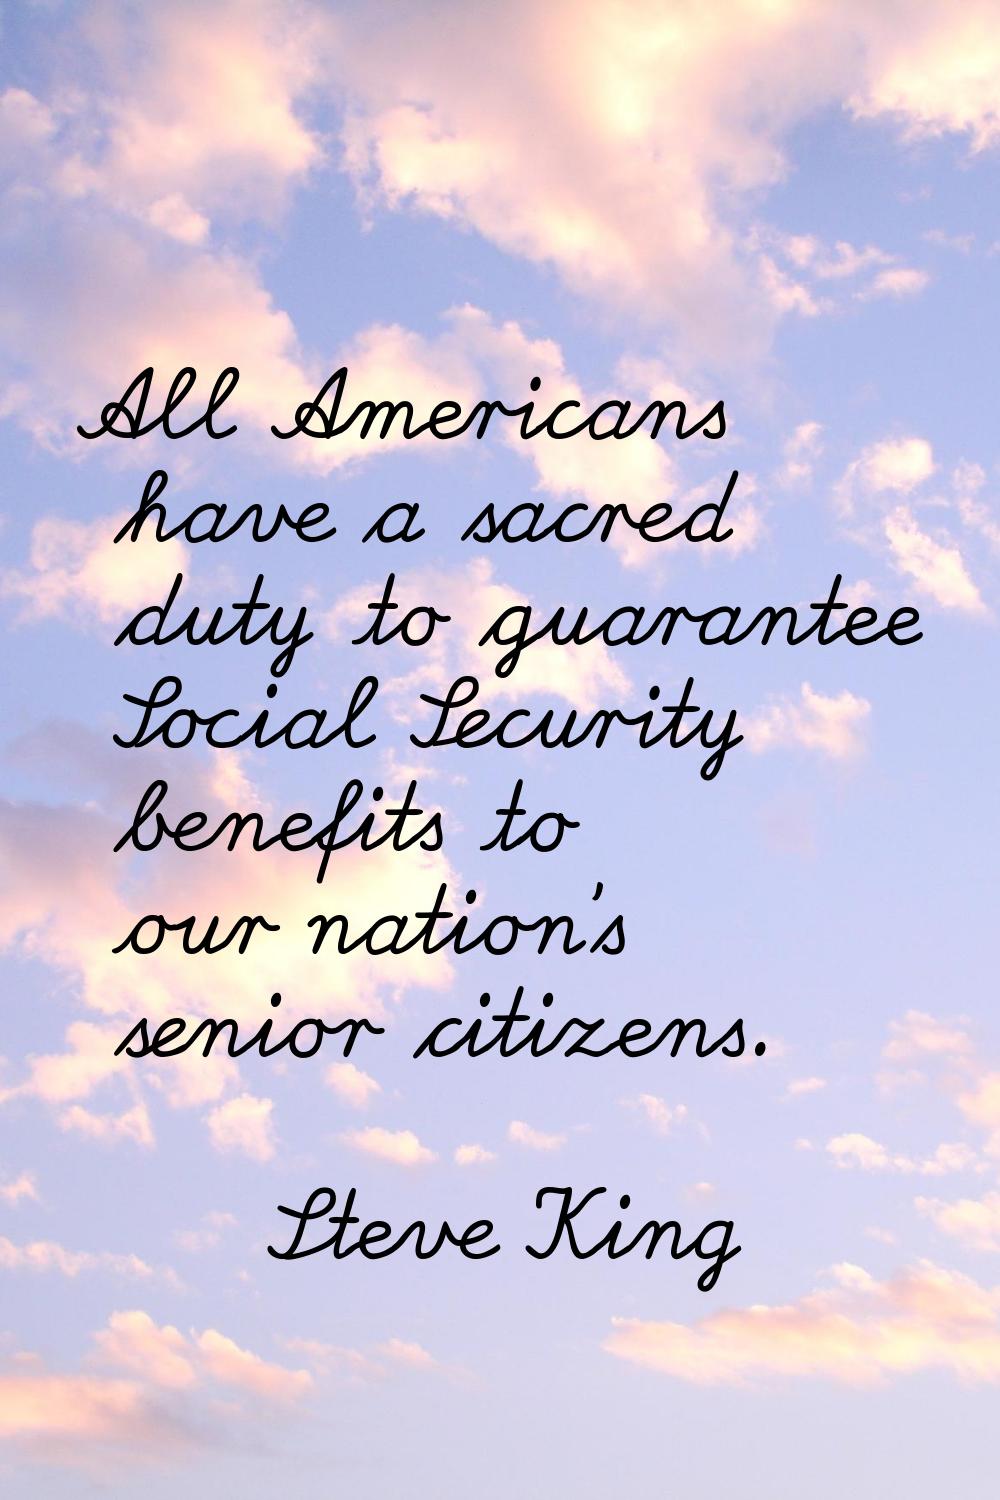 All Americans have a sacred duty to guarantee Social Security benefits to our nation's senior citiz